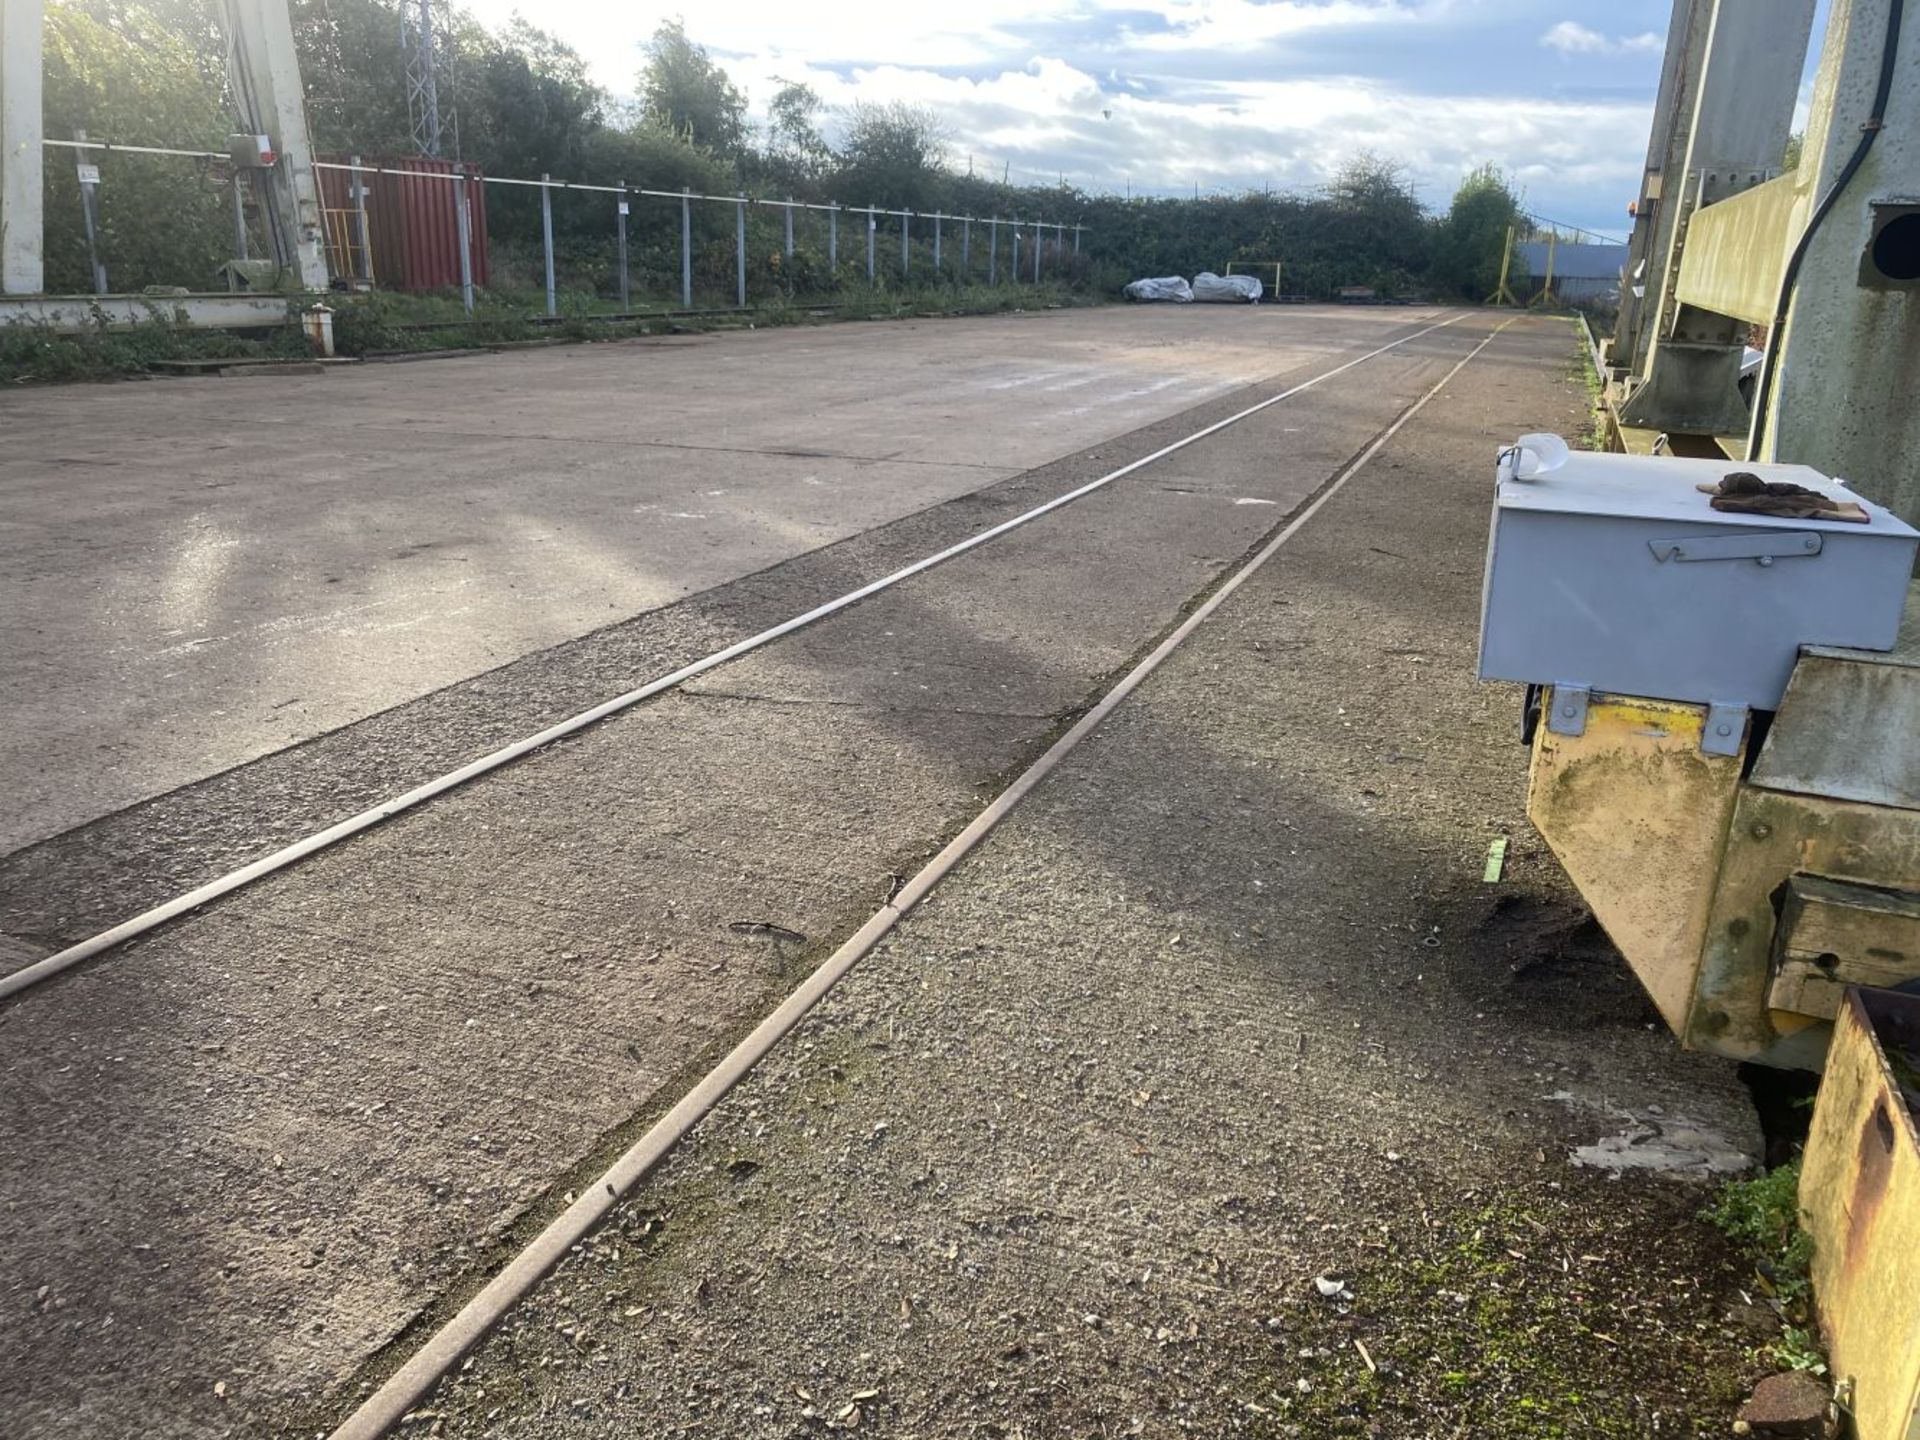 Approx. 70m of Rail (understood to be suitable for